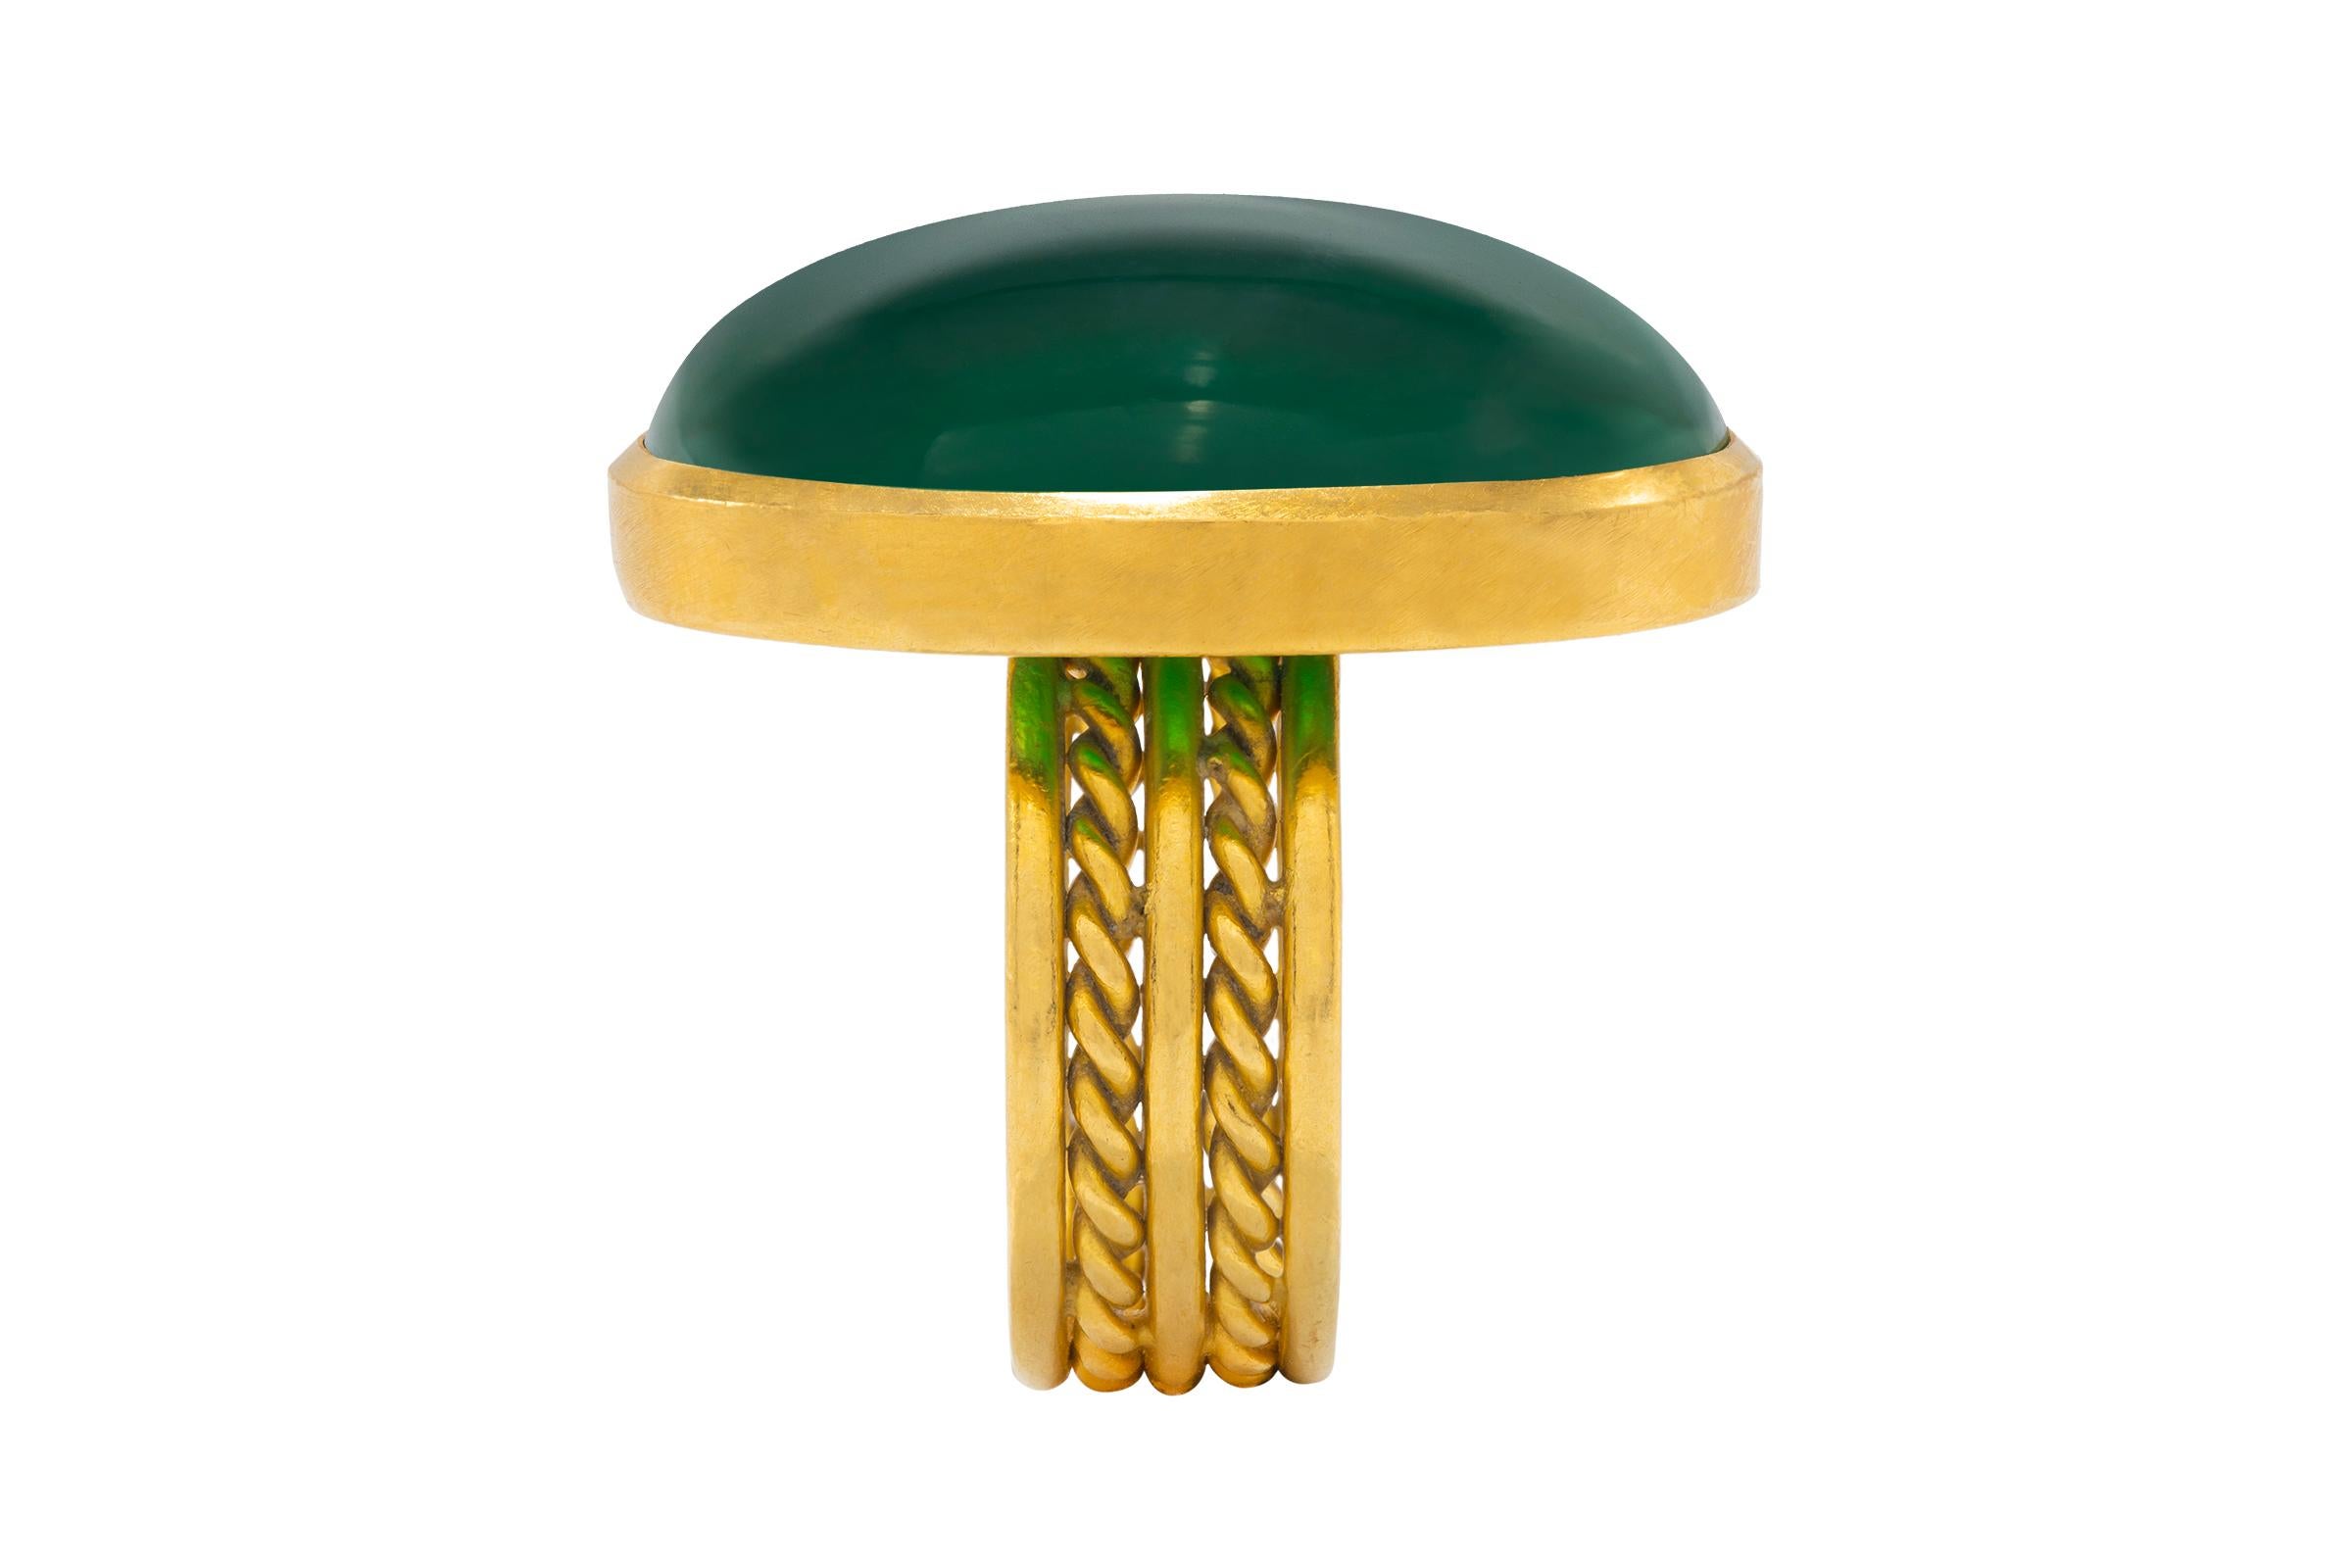 Oval Cut Green Agate Cocktail Ring in 22k Gold by Tagili